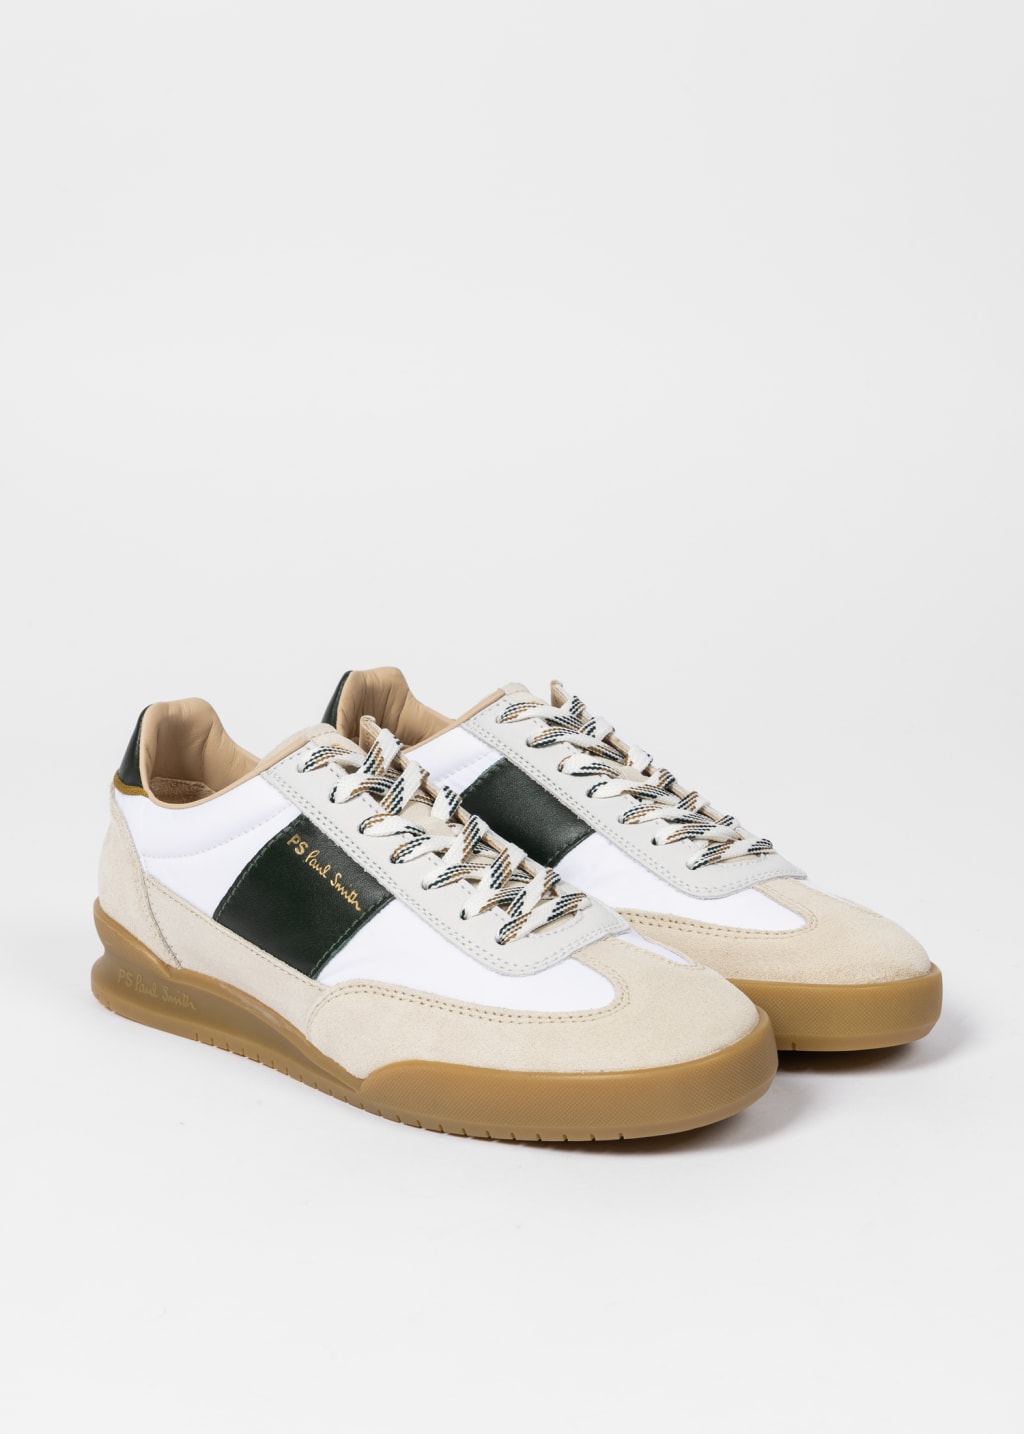 Pair View - White 'Dover' Trainers With Contrast Soles Paul Smith